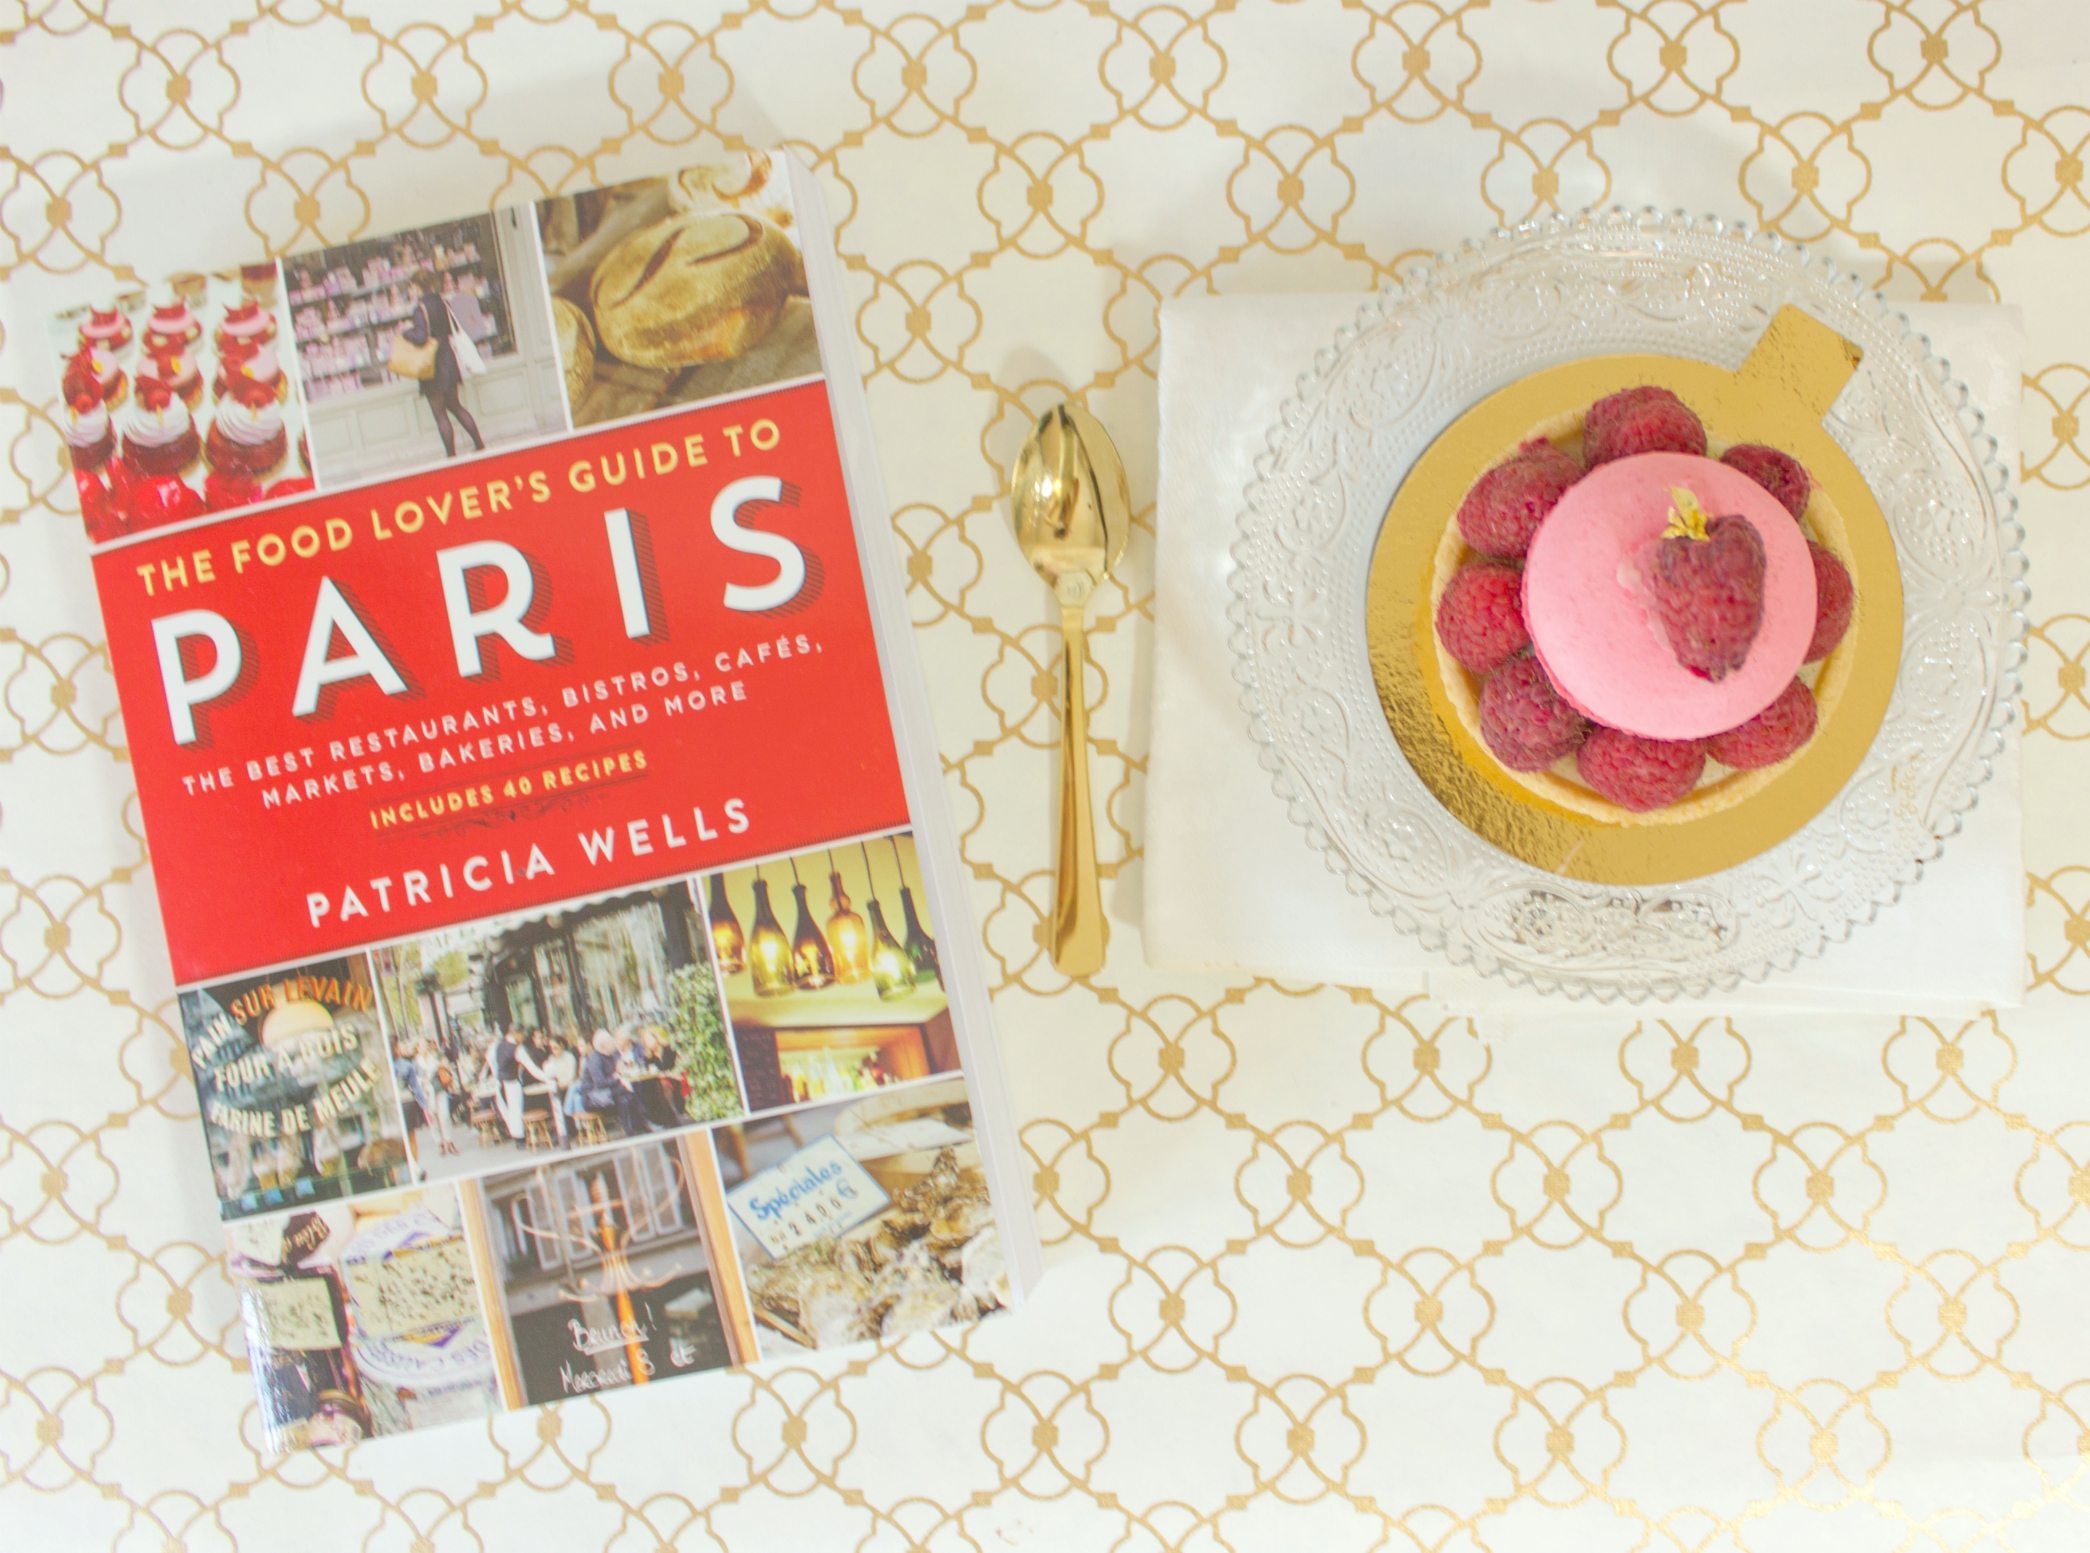 The Food Lover's Guide To PARIS